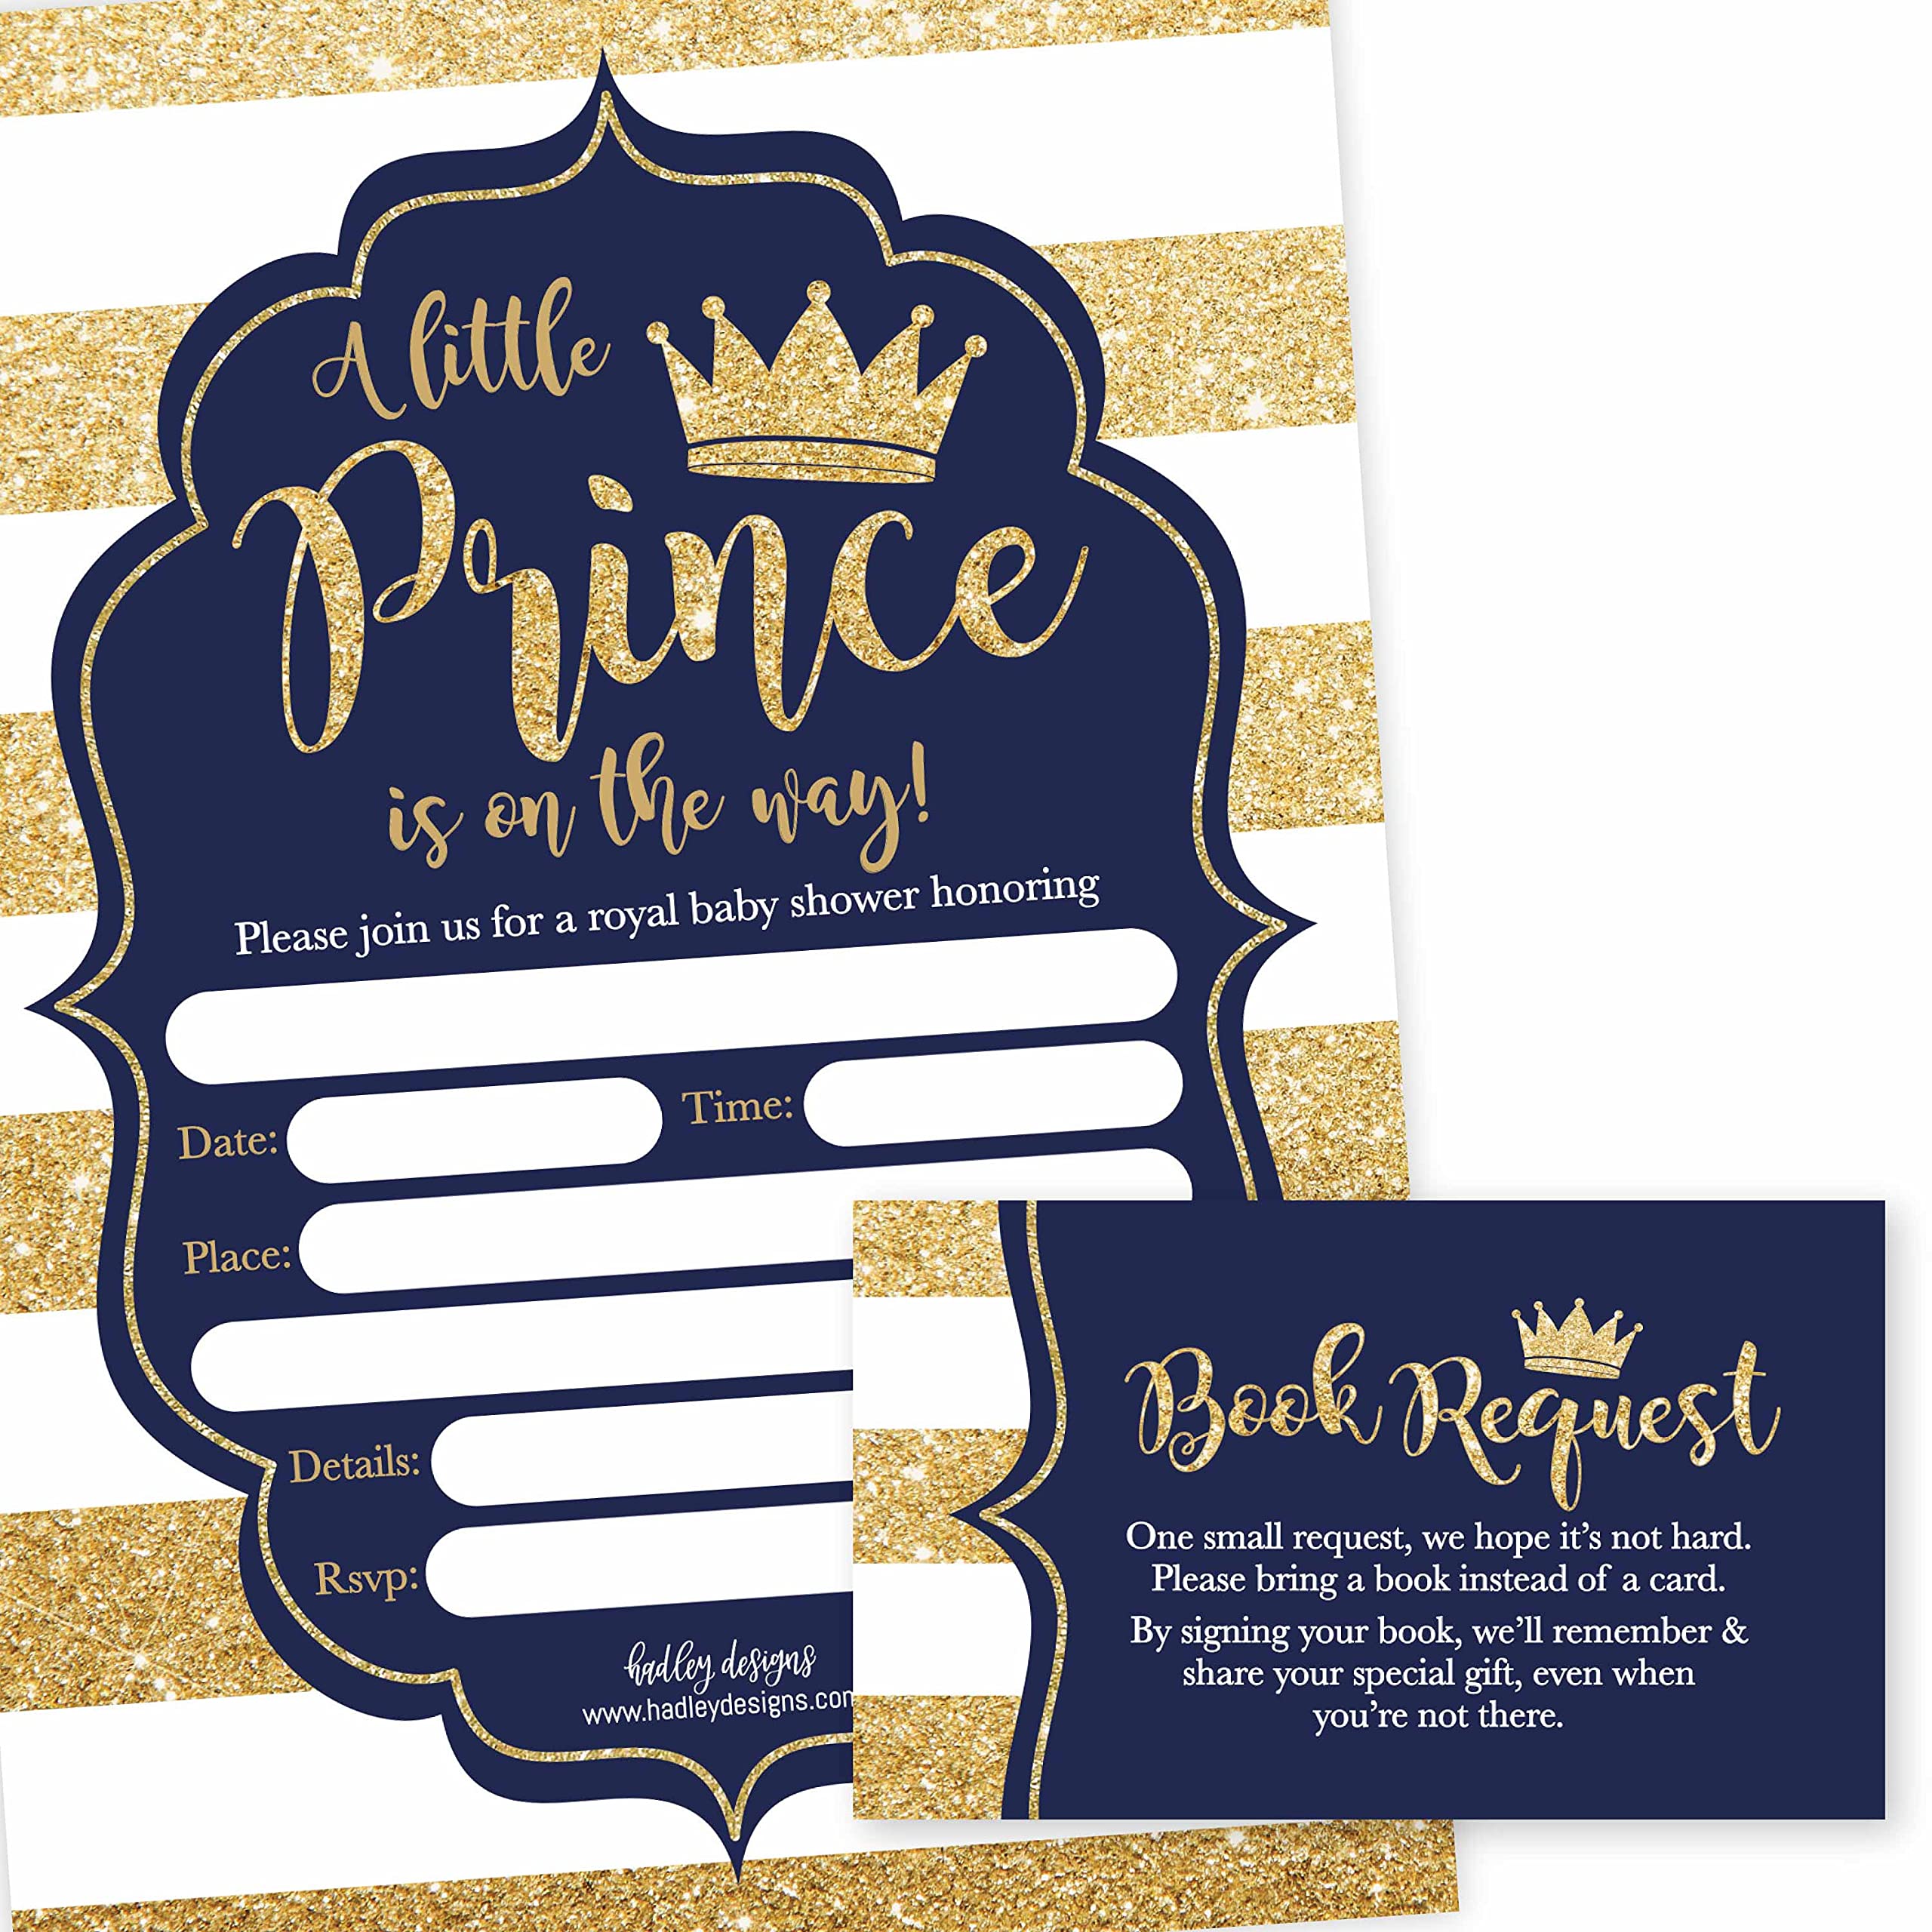 25 Little Prince Baby Shower Invitations, 25 Books For Baby Shower Request Cards, Sprinkle Invite Boy, Bring A Book Instead Of A Card, Baby Shower Invitation Inserts Baby Shower Guest Book Alternative